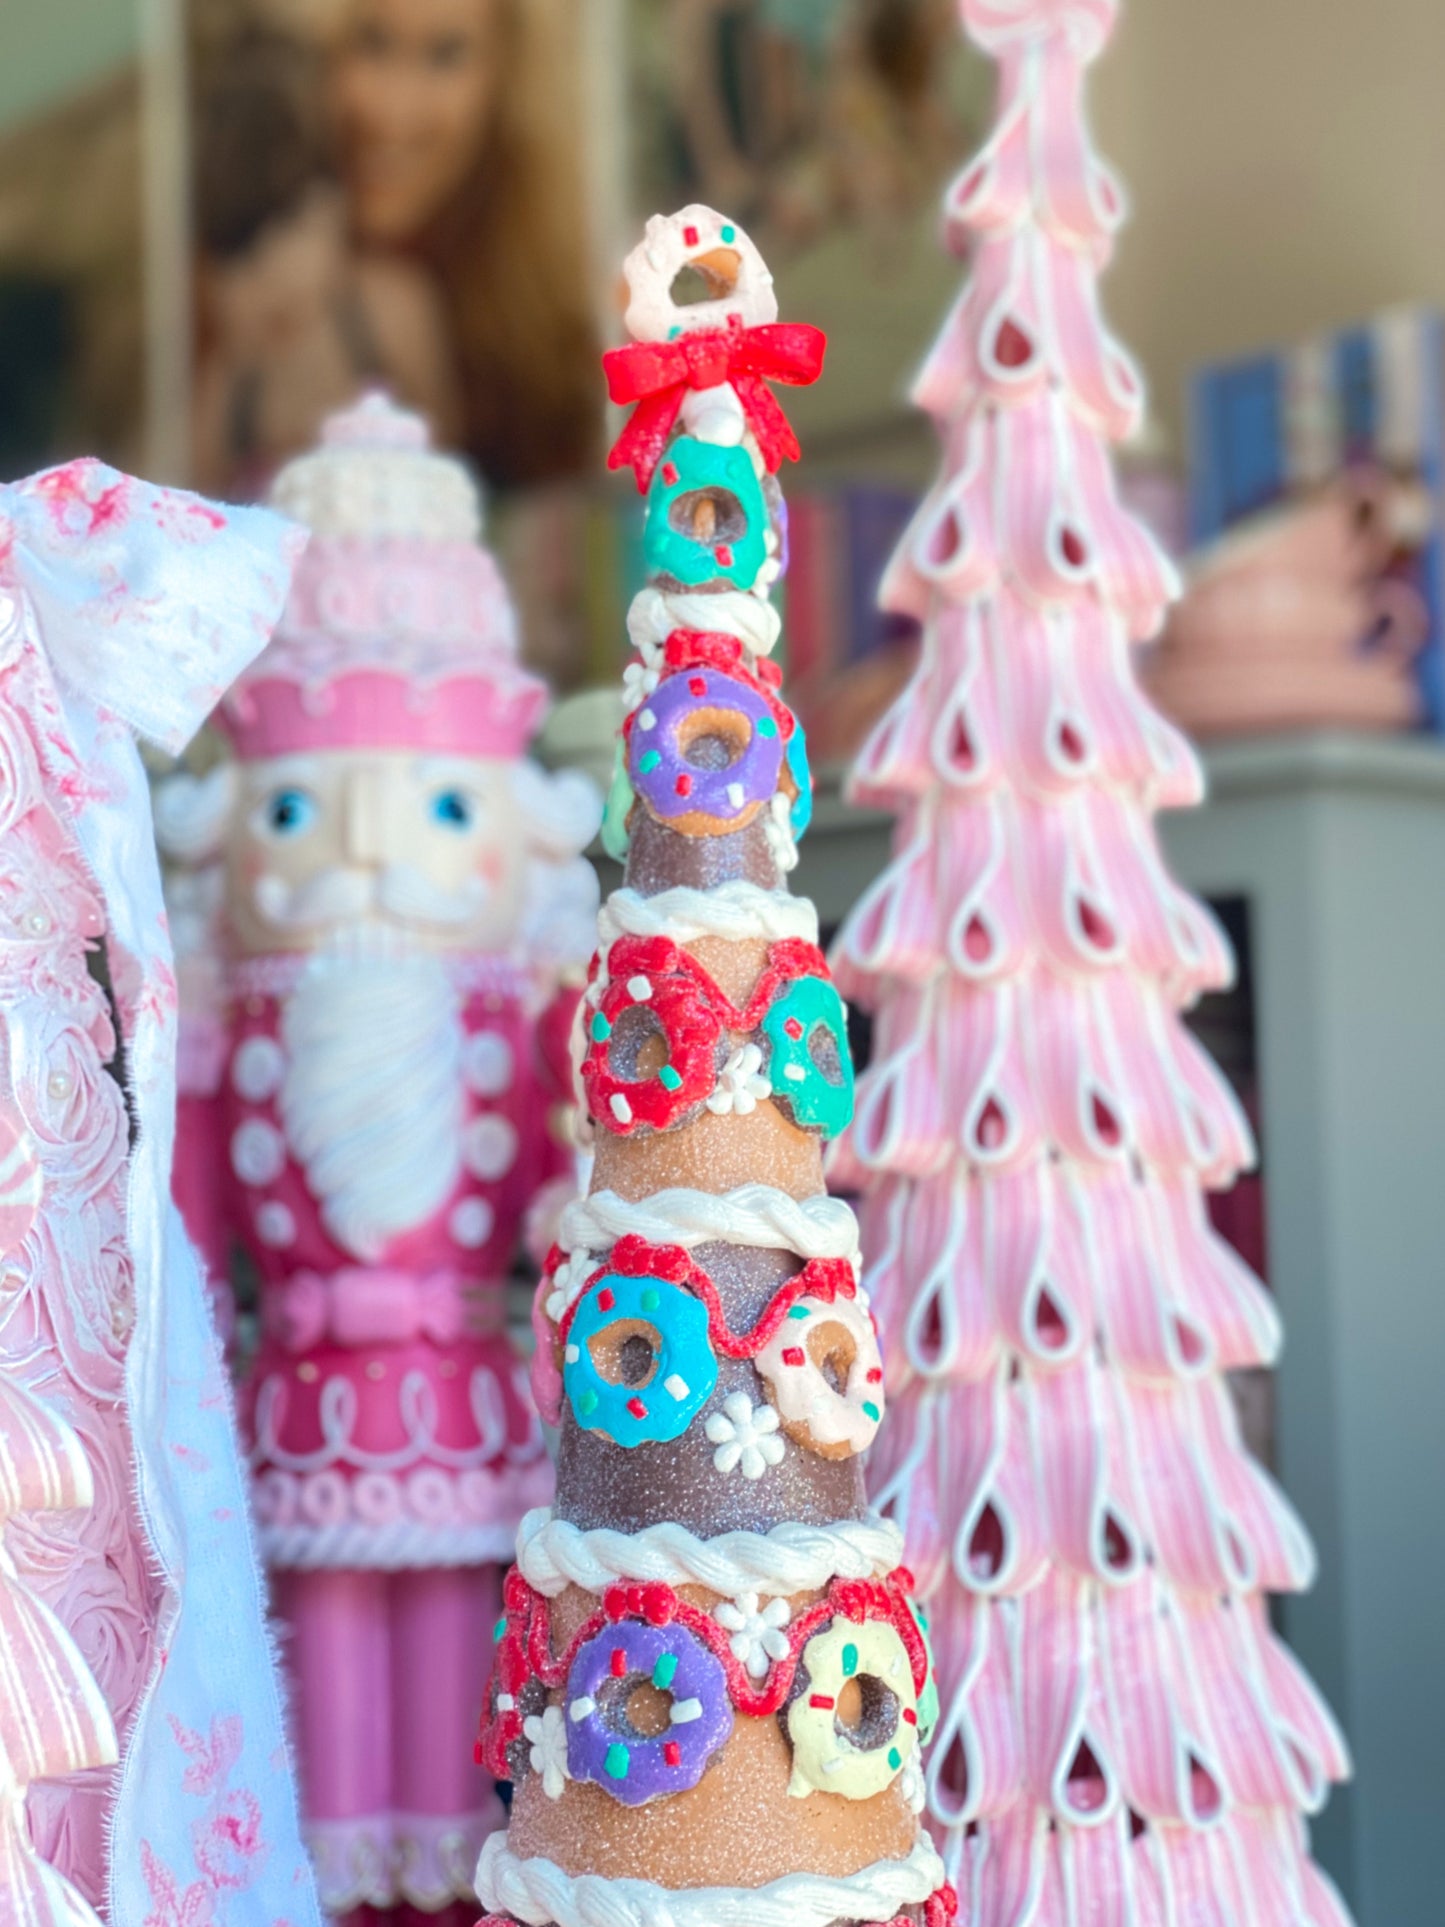 Large Gingerbread Tree covered in Doughnuts